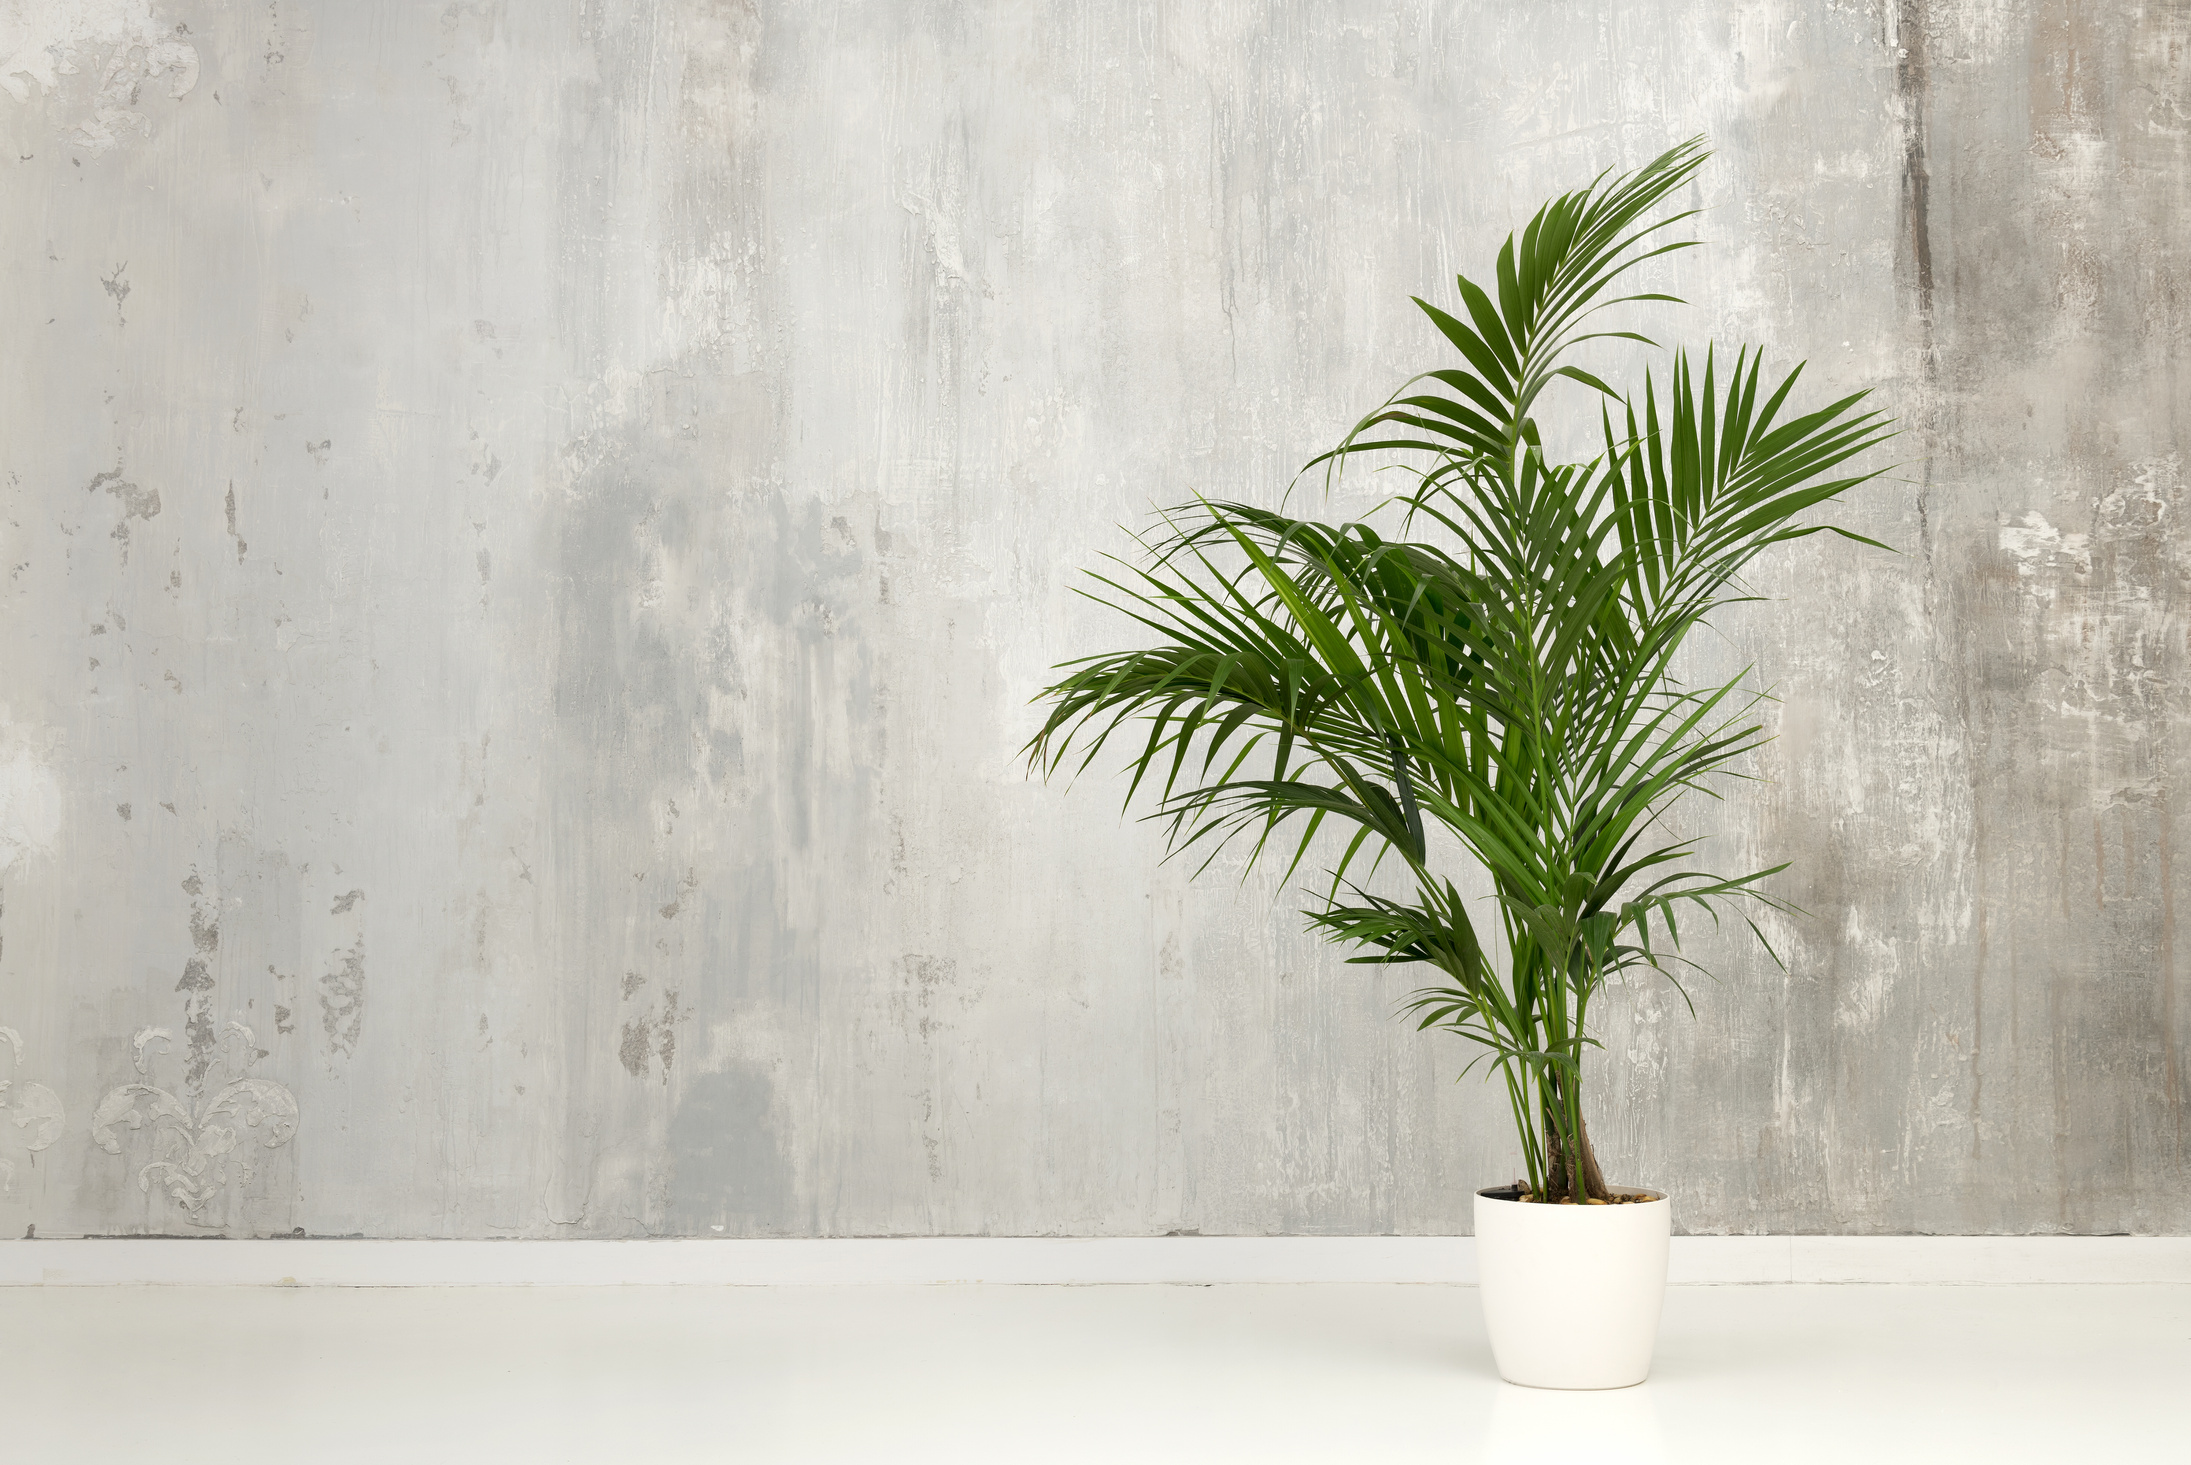 Potted Kentia Palm Plant Against a Gray Concrete Wall